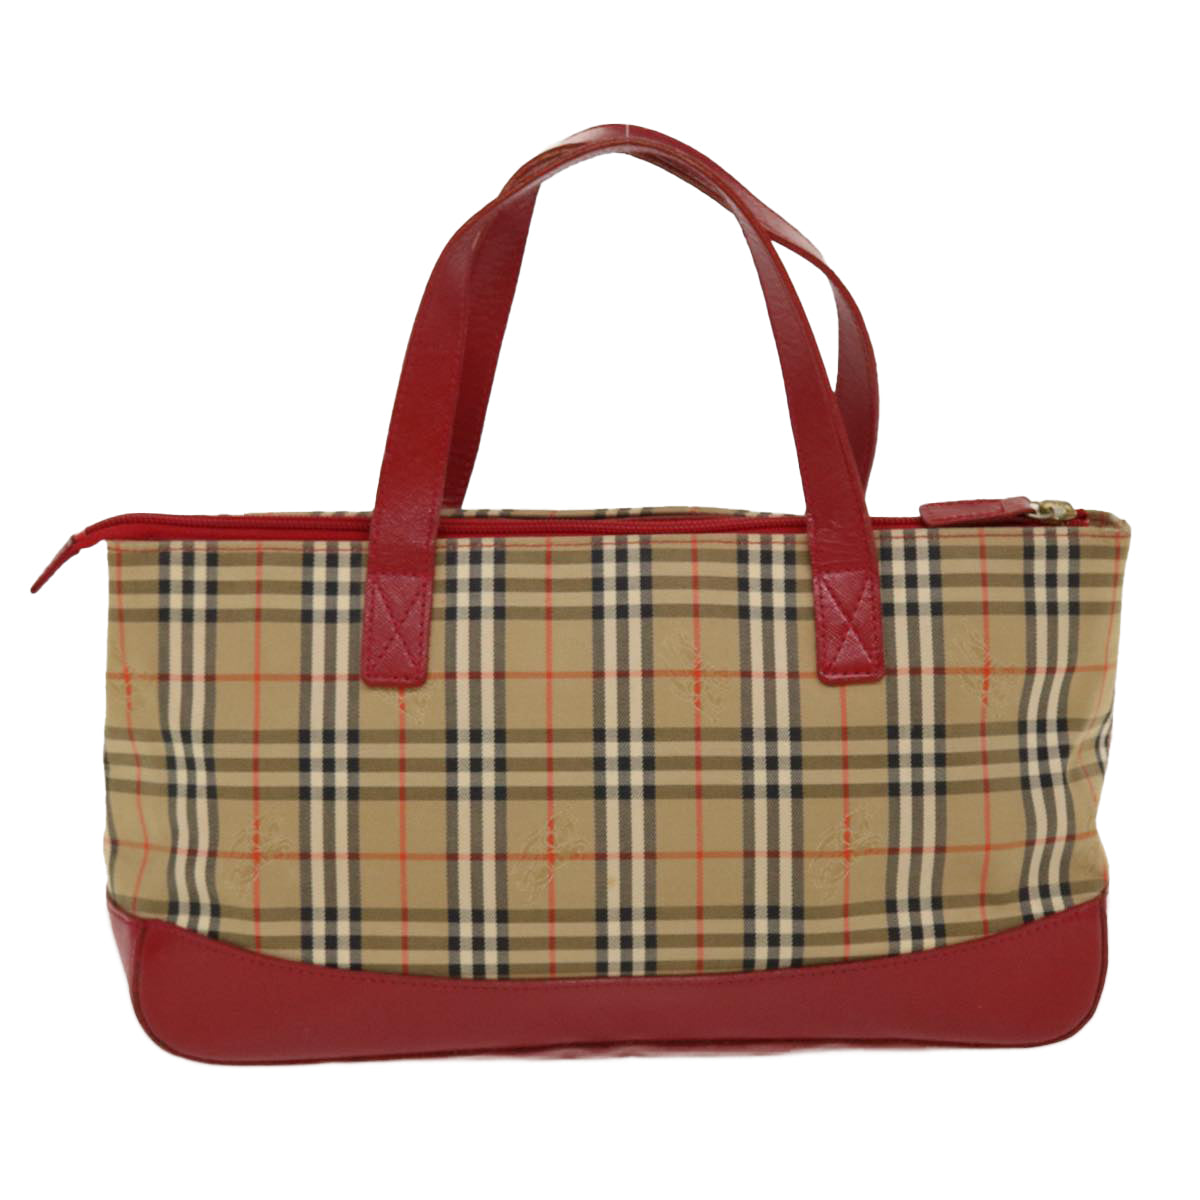 Burberrys Hand Bag Nylon Leather Beige Red Auth bs4630 - 0